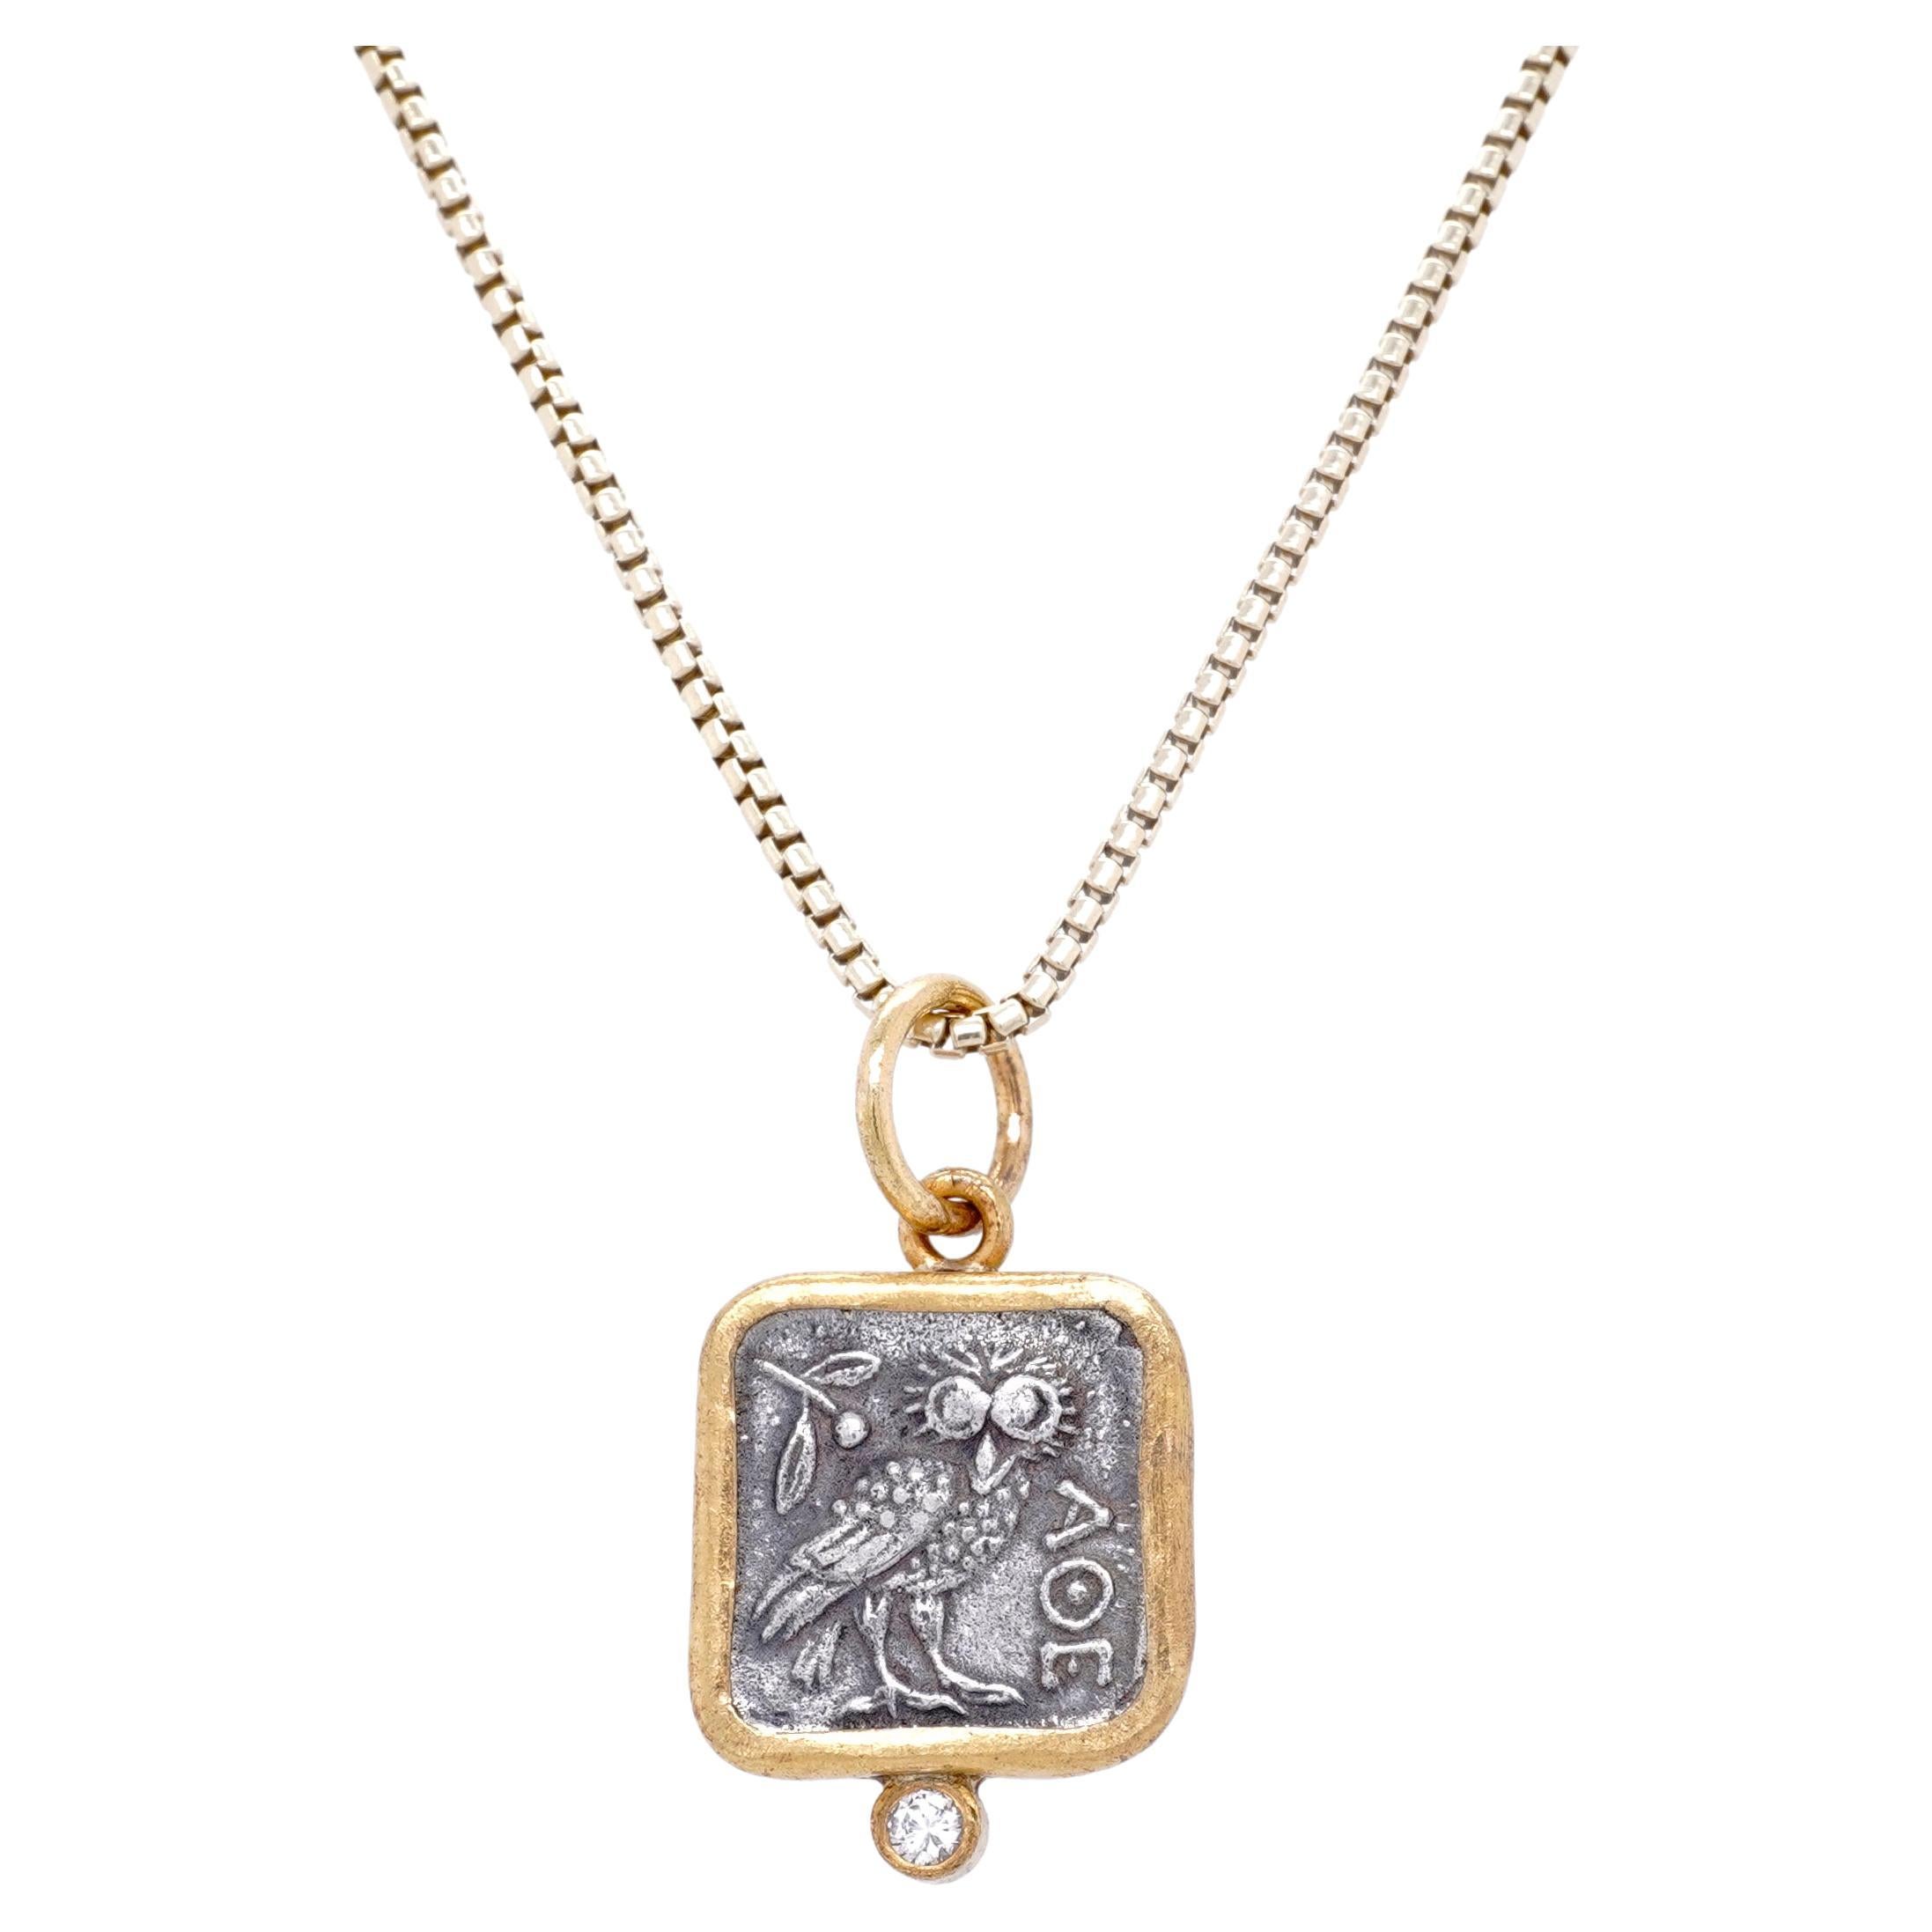 Round Cut Athena's Owl with Diamond, Square, Coin Charm Amulet Pendant Necklace, 24kt Gold